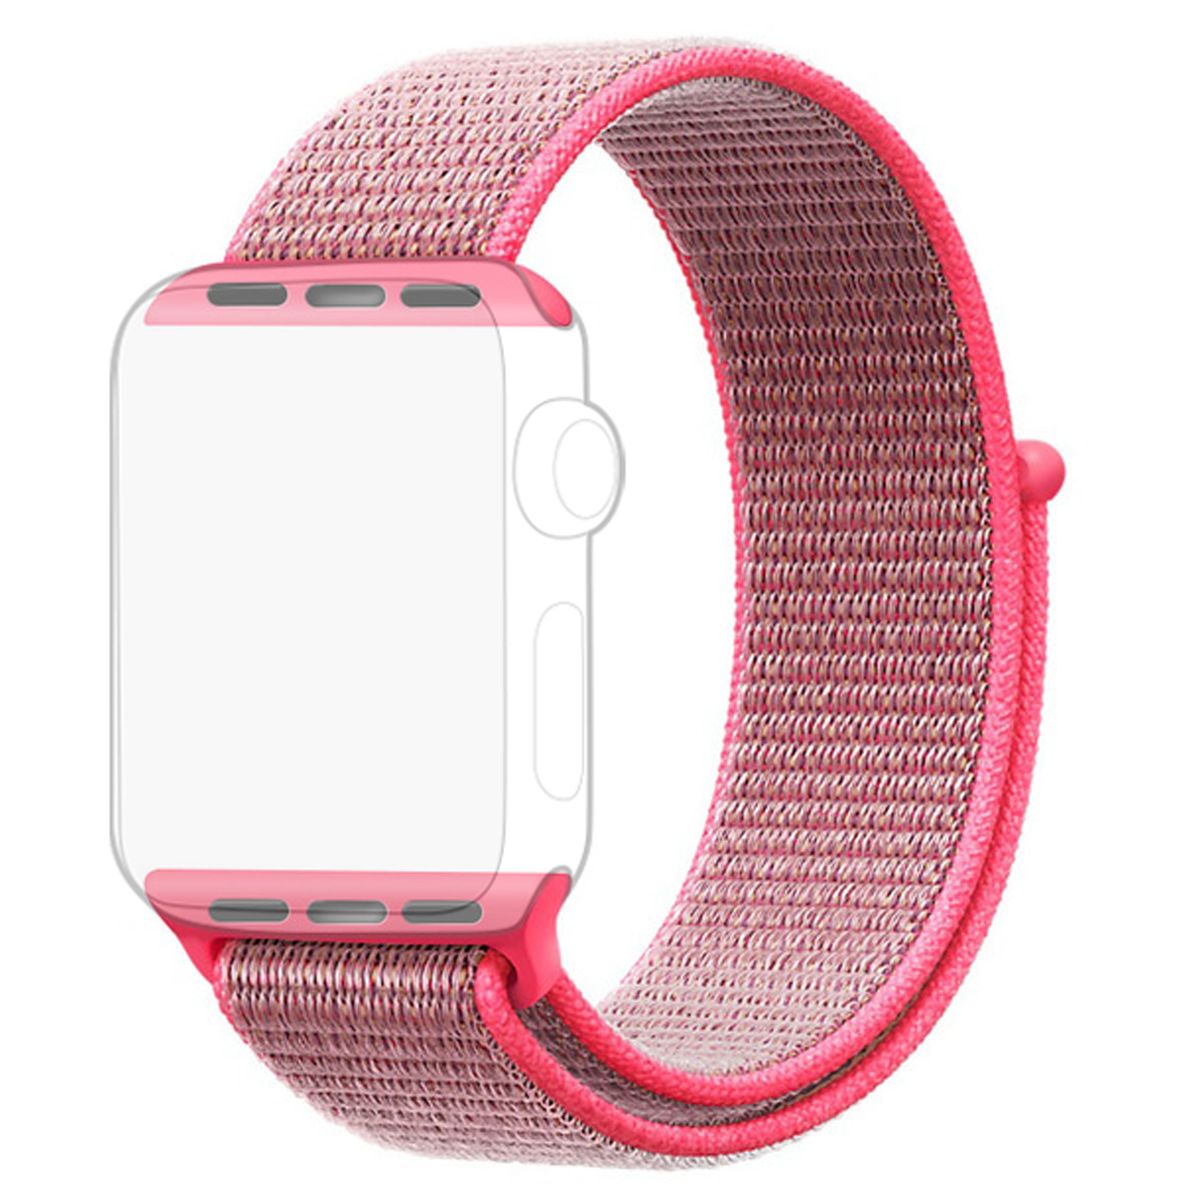 Pink Strap/Band for Apple watch 38/40mm - Series 1-7 - PiFit | Buy ...